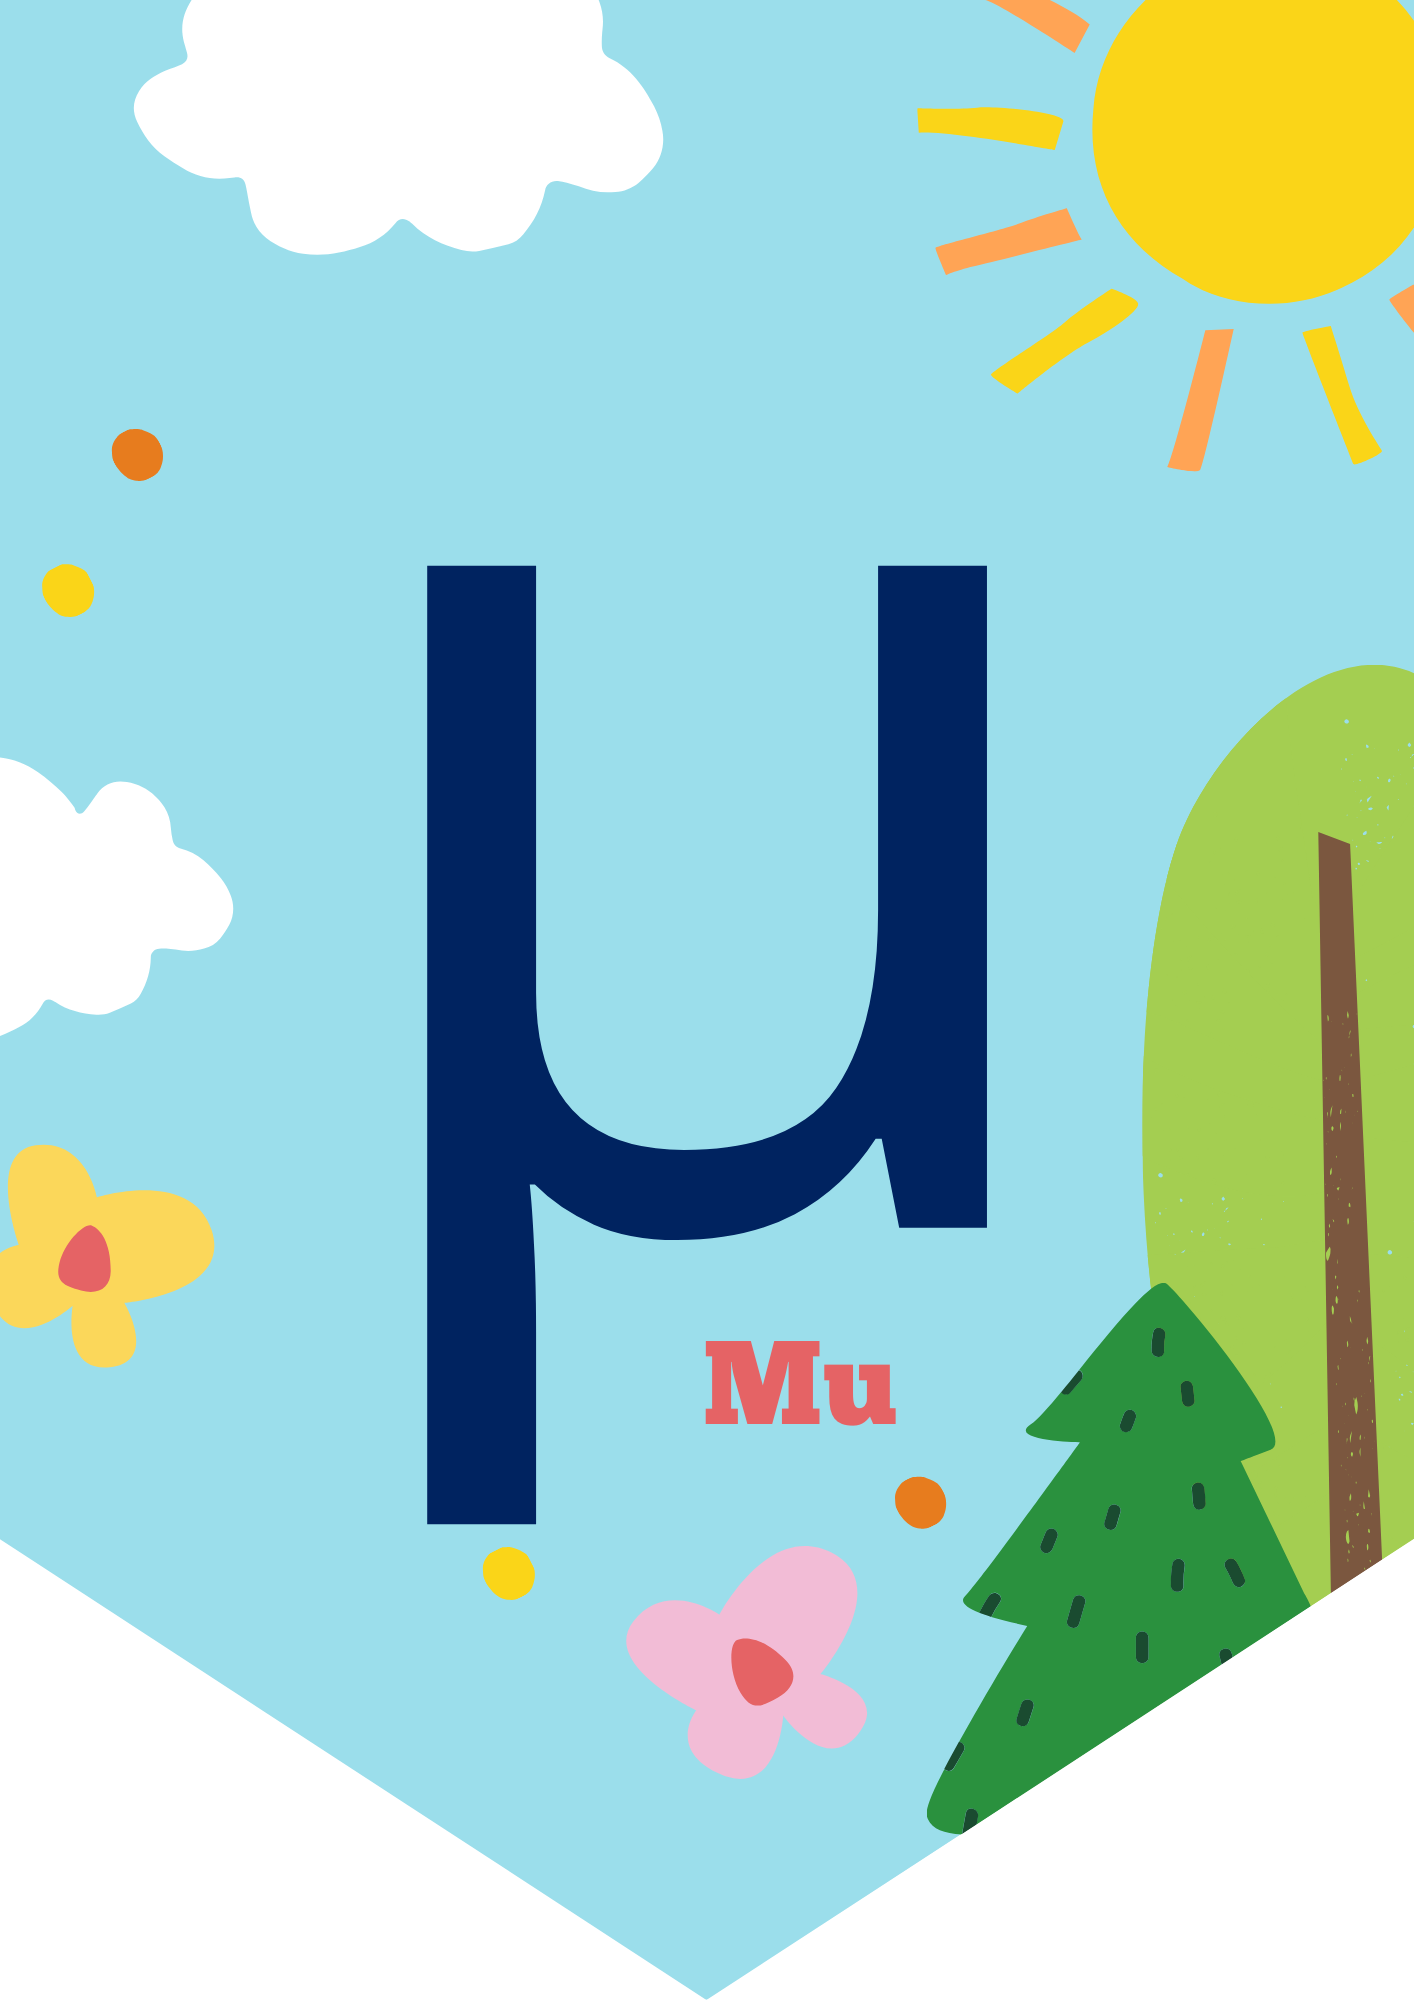 Mu: The Twelfth Letter, Not Just a Sound